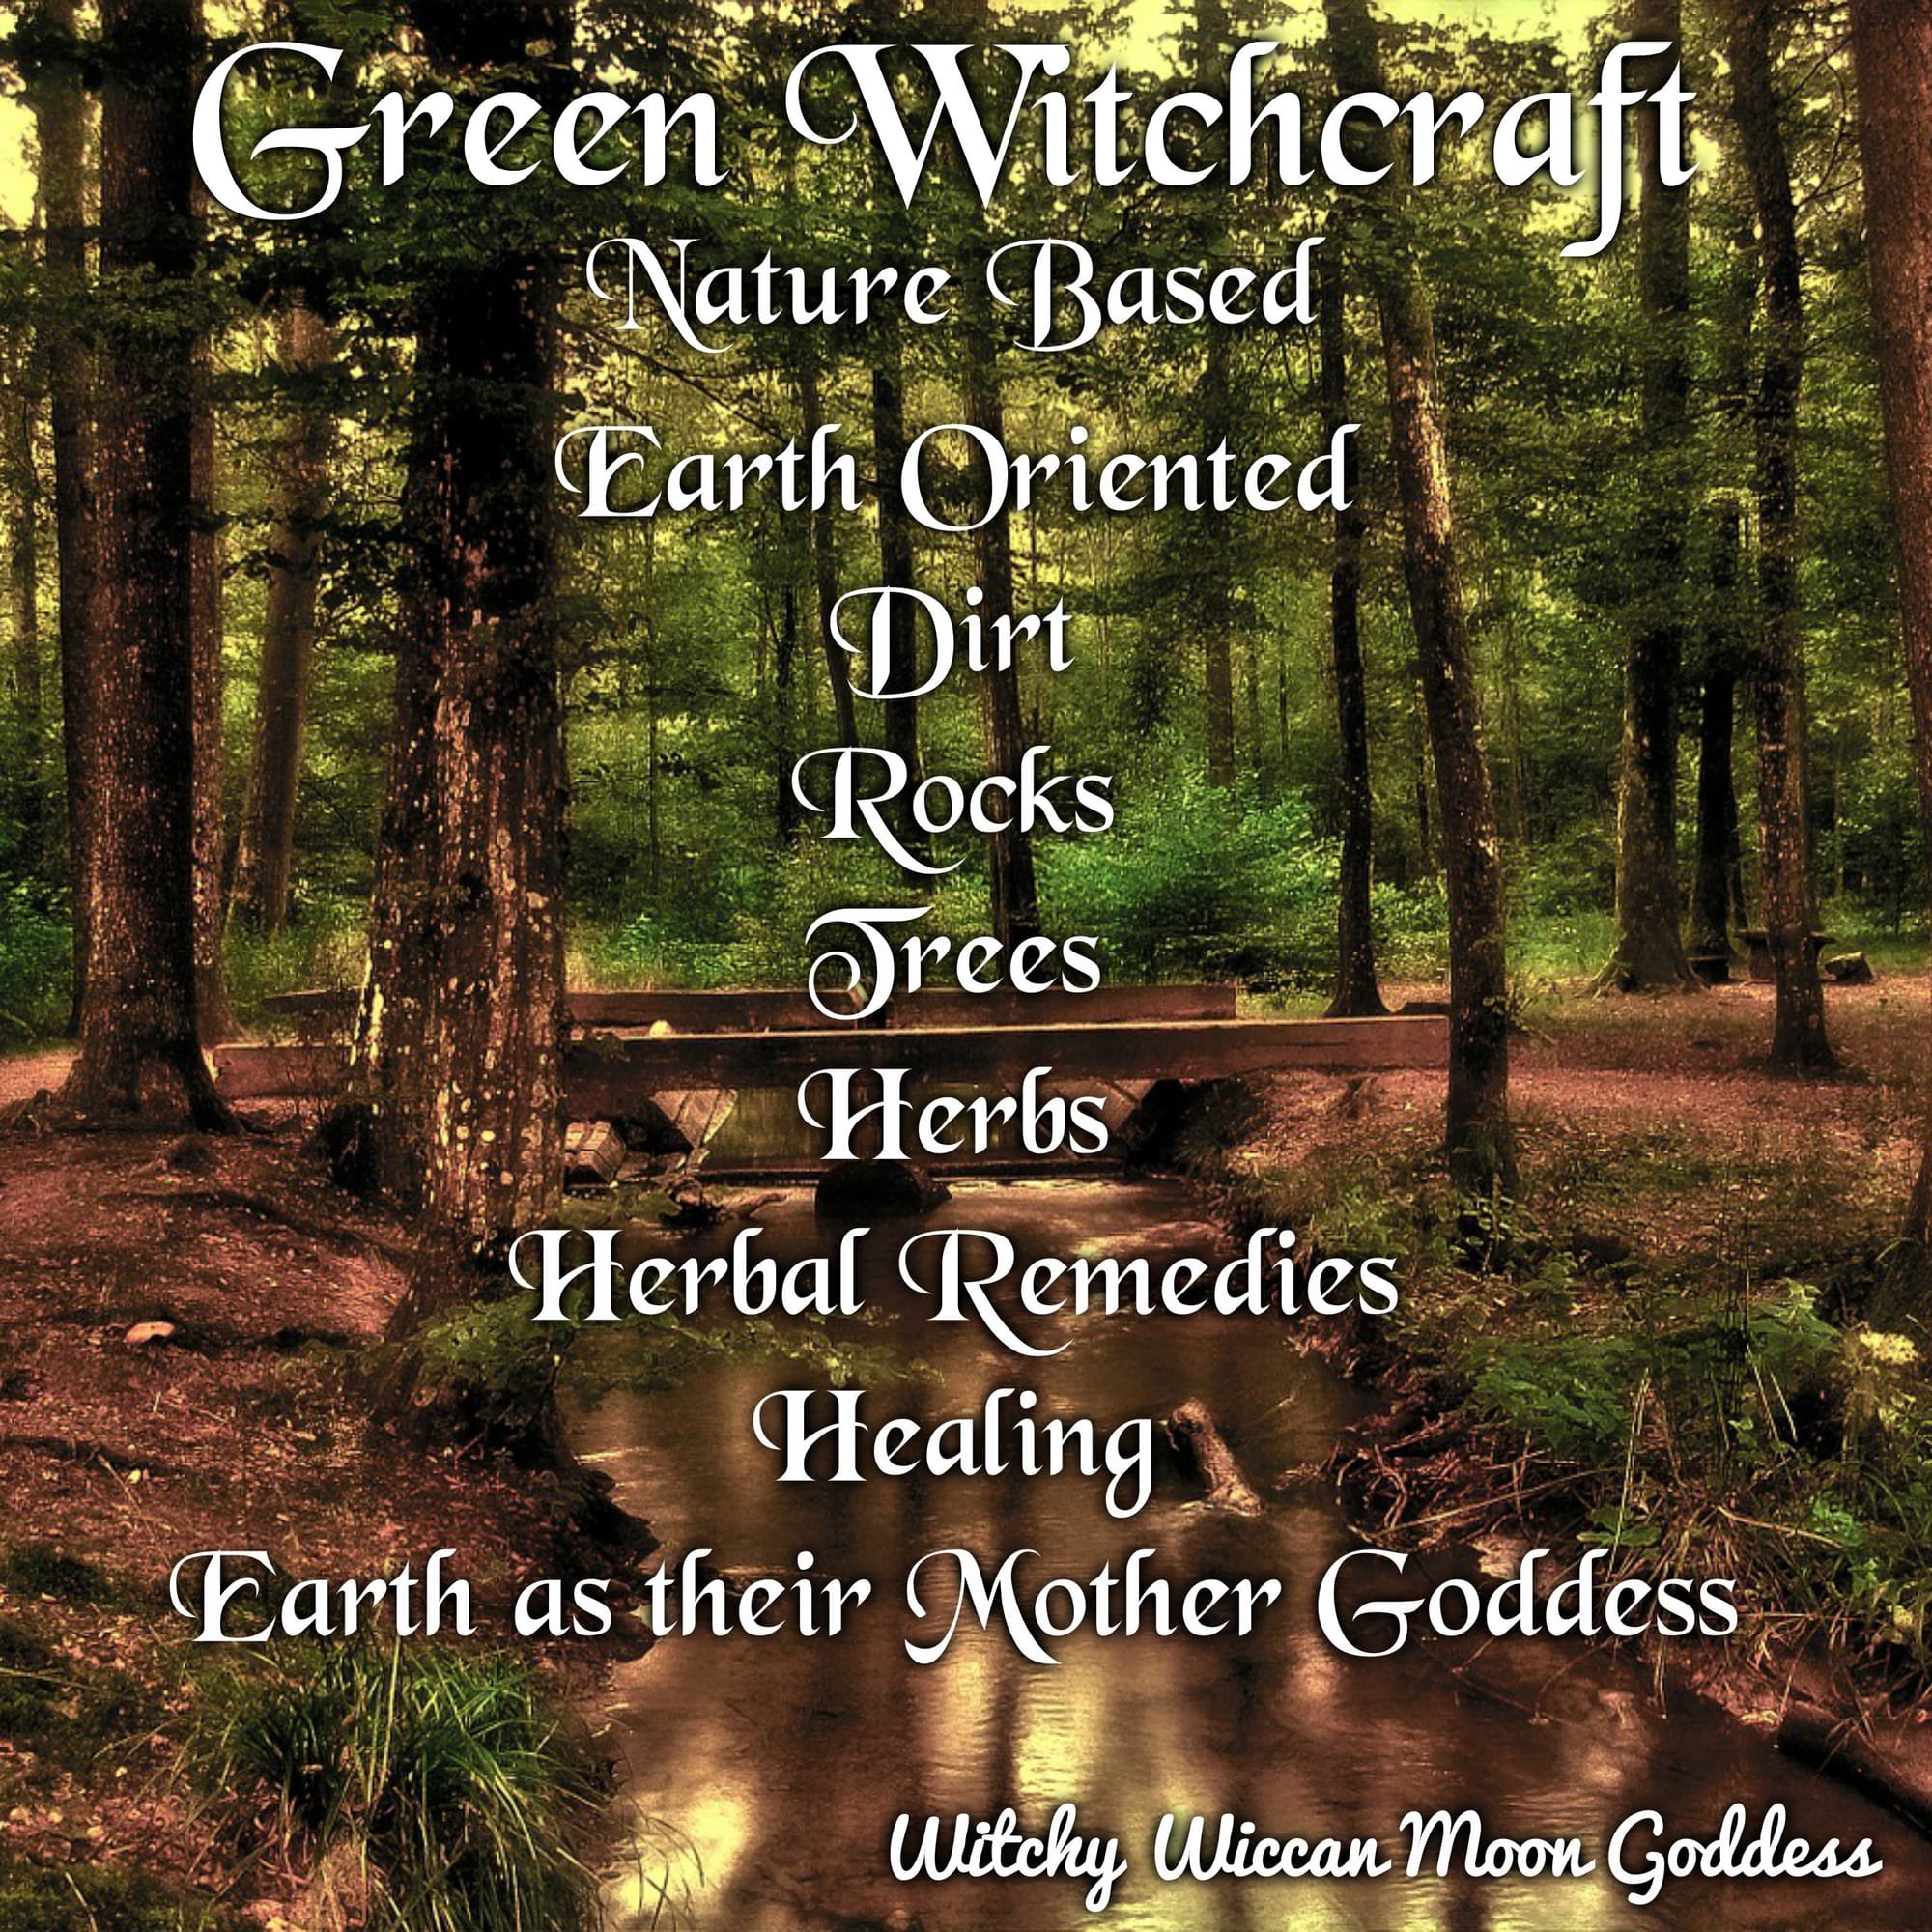 Green Witchcraft: Nature Based, Earth Oriented, Dirt, Rocks, Trees, Herbs, Herbal Remedies, Healing, Earth as their Mother Goddess